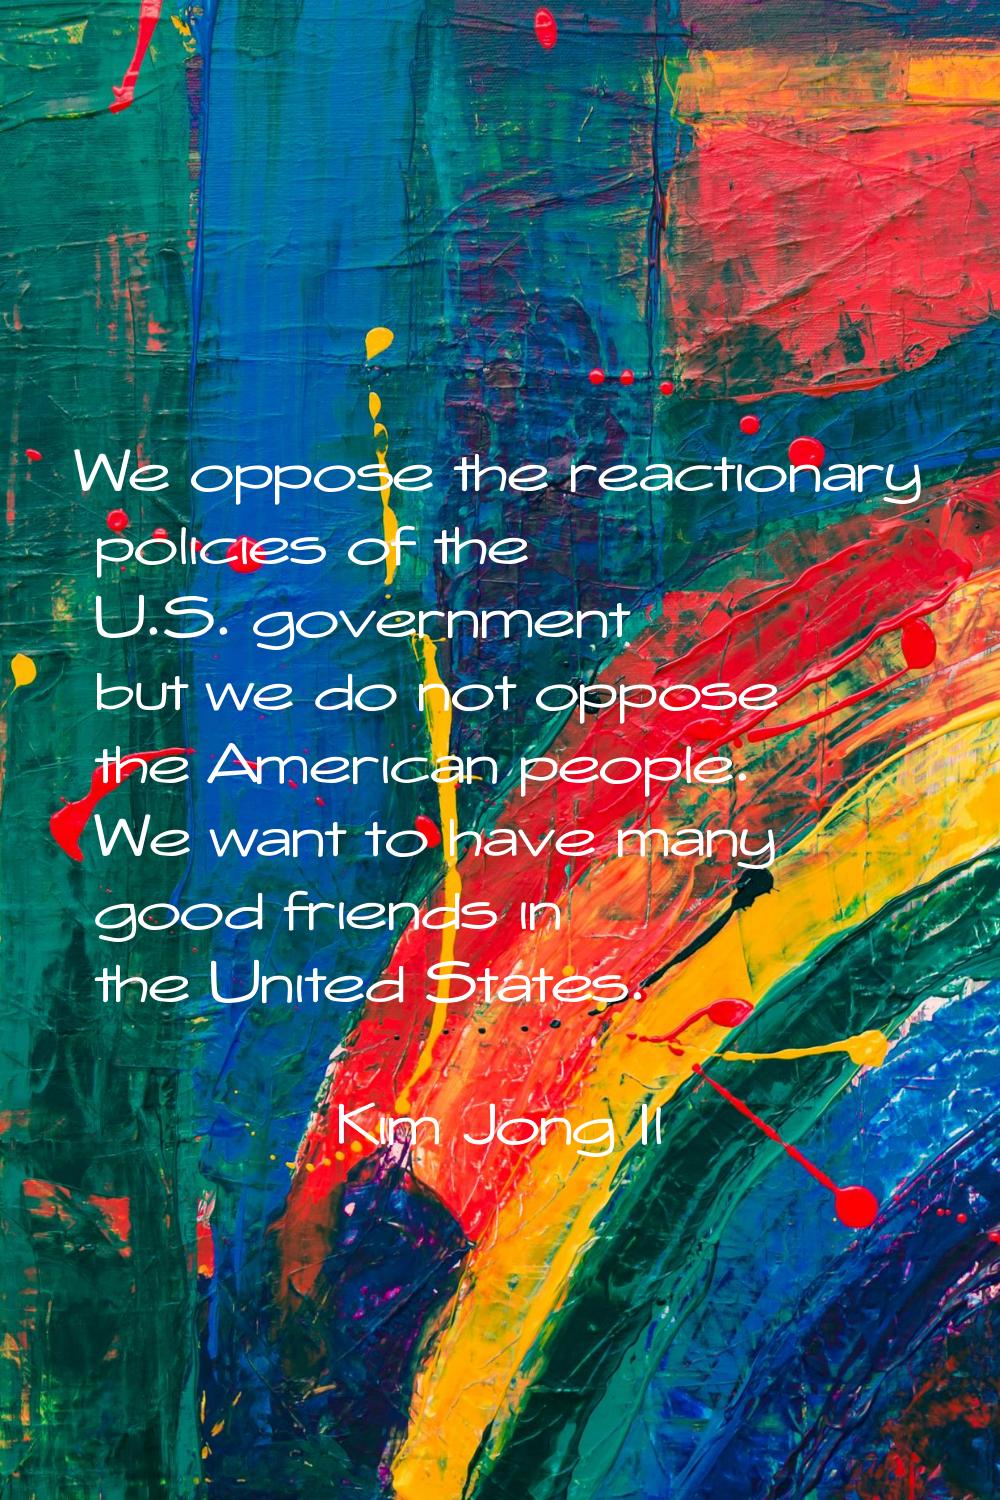 We oppose the reactionary policies of the U.S. government but we do not oppose the American people.